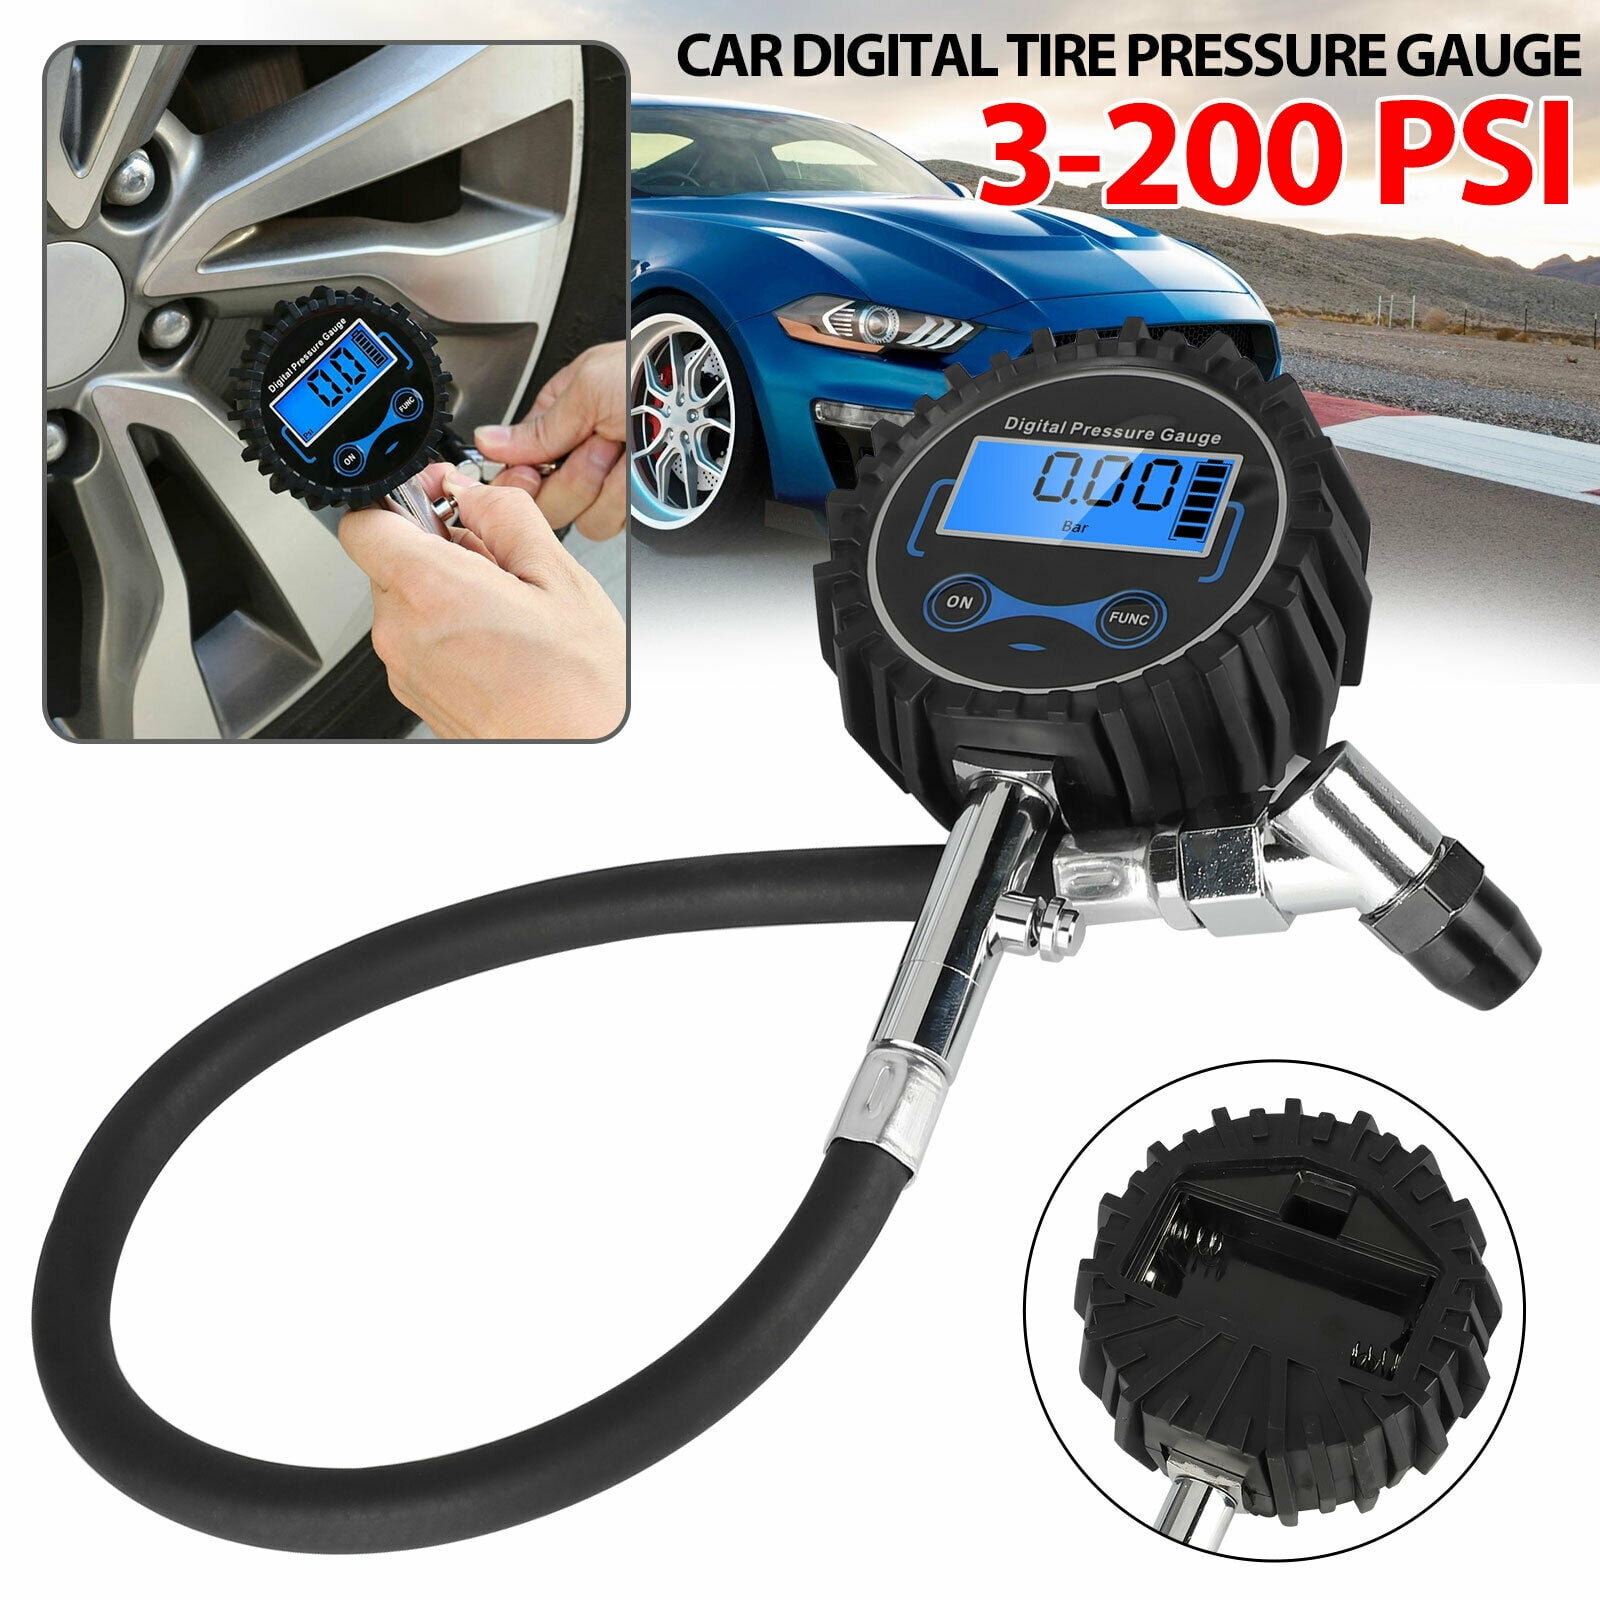 Air Chuck and Compressor Accessories Heavy Duty with Rubber Hose SUV Quick Connect Coupler for Car ATUNME Tire Pressure Gauge 200 PSI Digital Auto Tire Inflator Gauge & Gun RV Valve Extender 